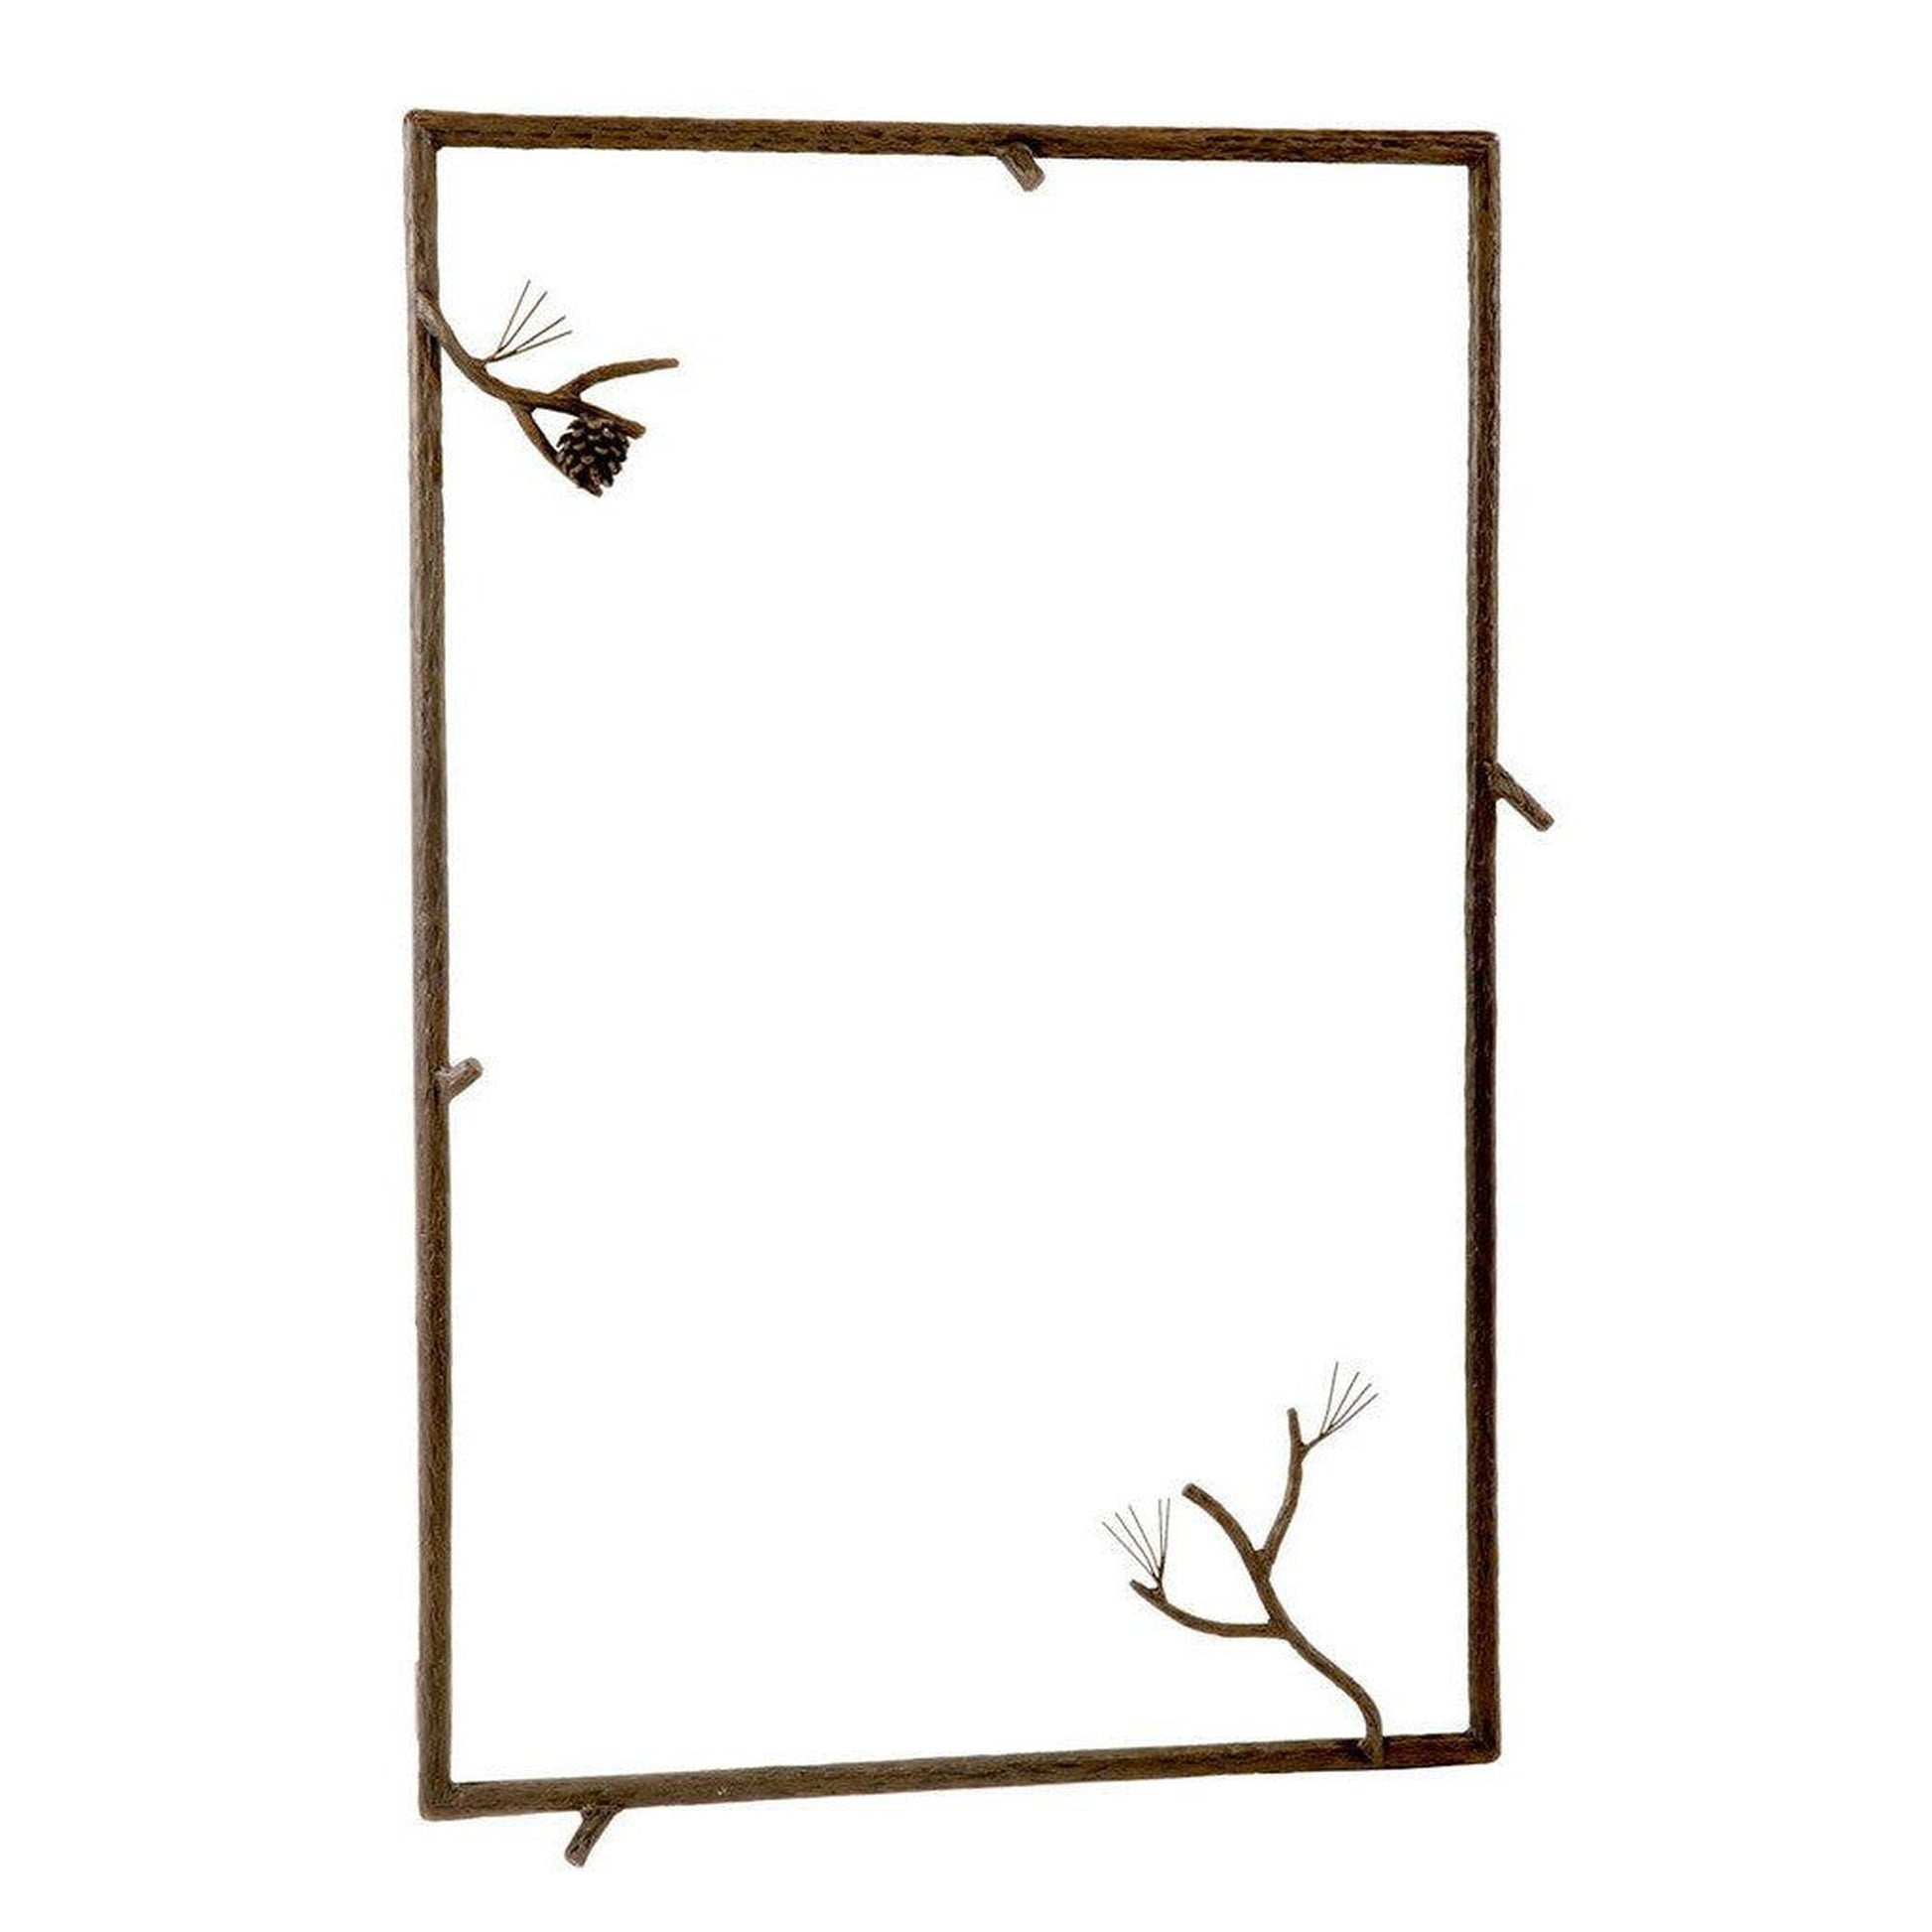 Stone County Ironworks Pine 37" x 25" Large Natural Black Iron Wall Mirror